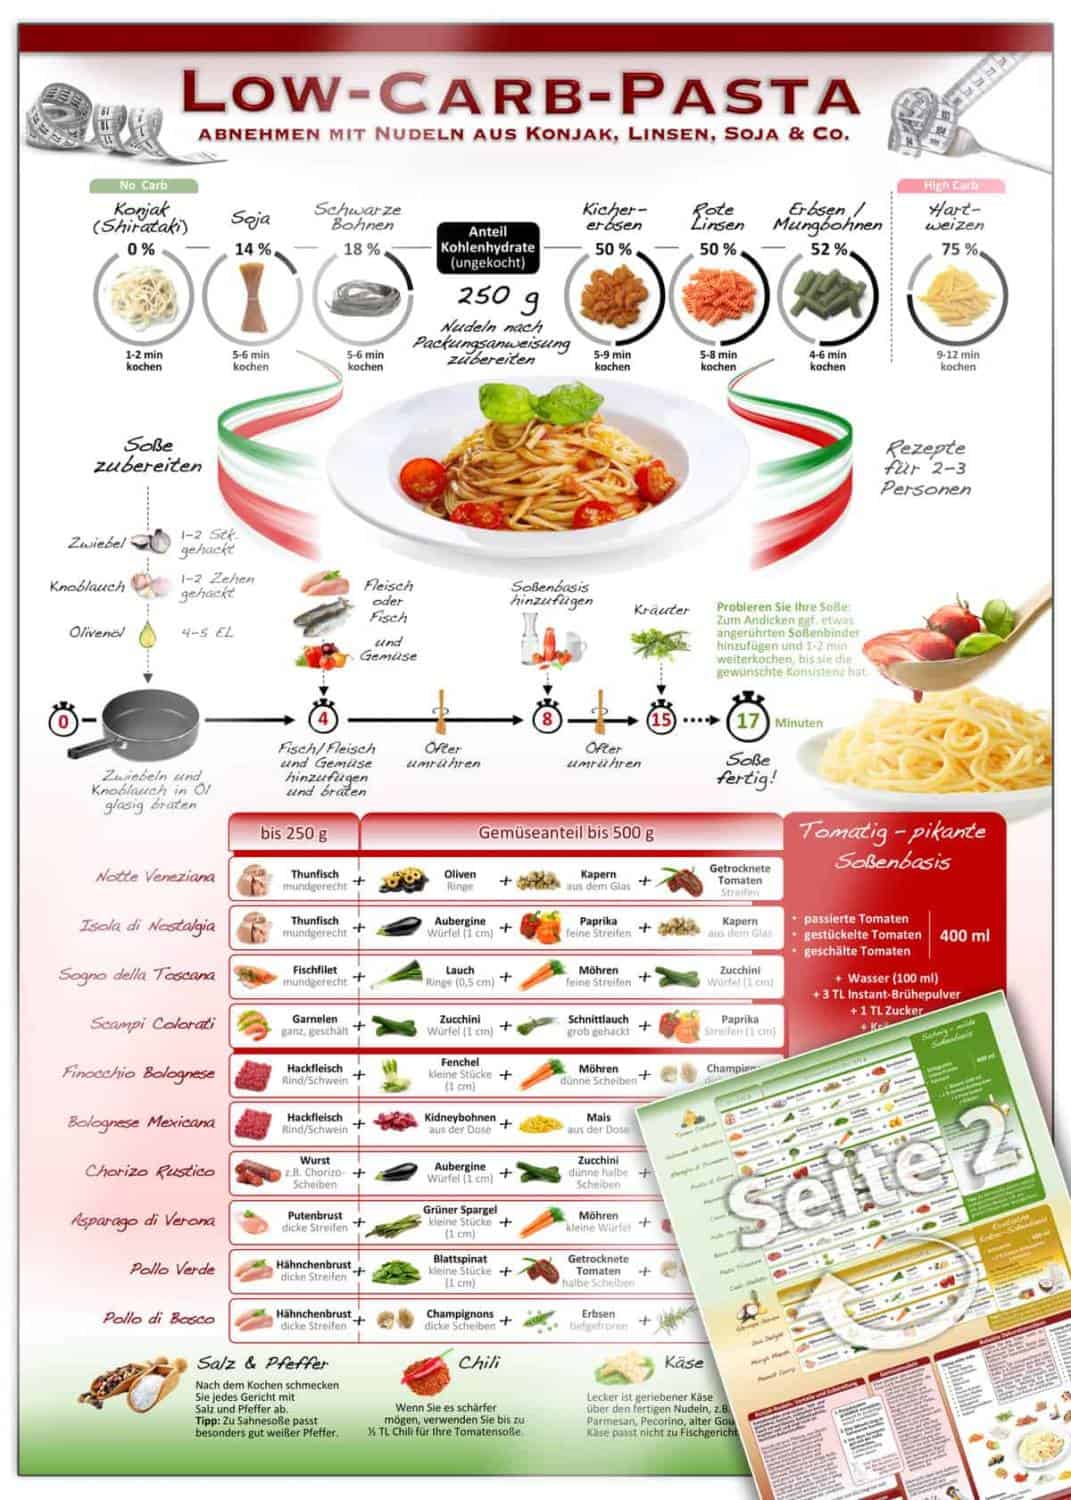 Low-Carb-Pasta.-1-scaled.jpg